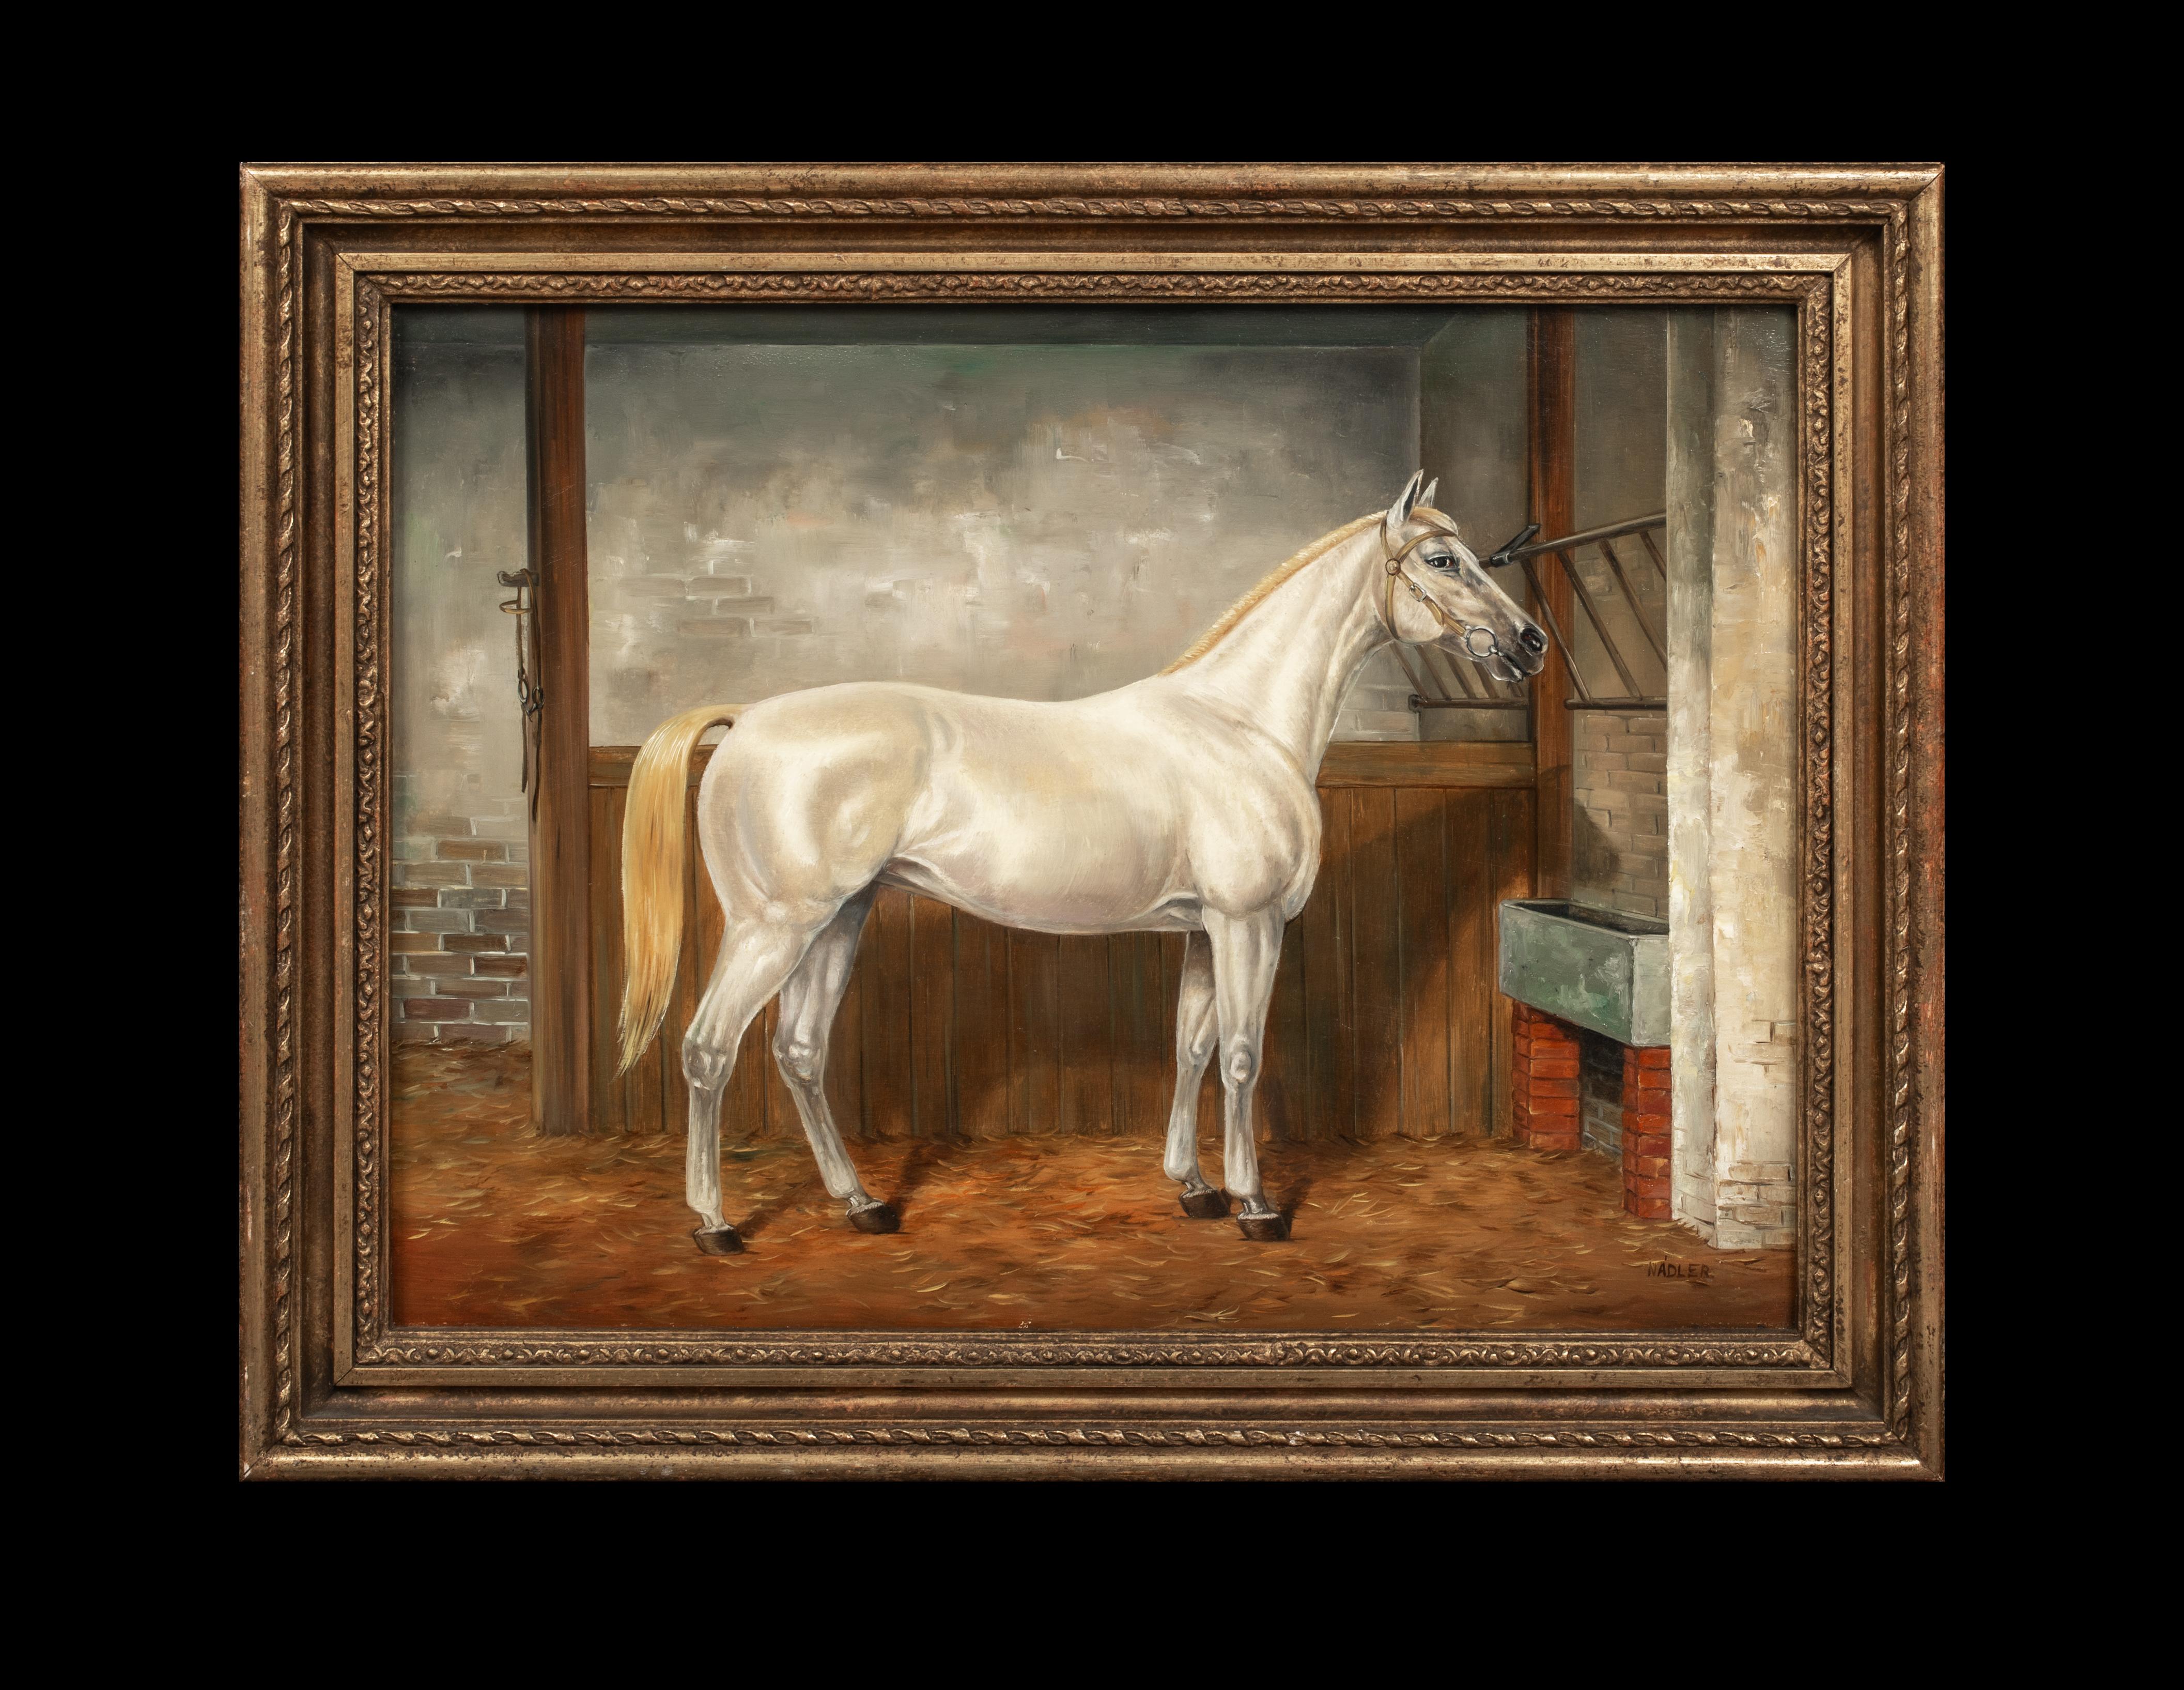 Grey White Horse In a Loose Box, circa 1900  by Louis NADLER - Painting by Unknown